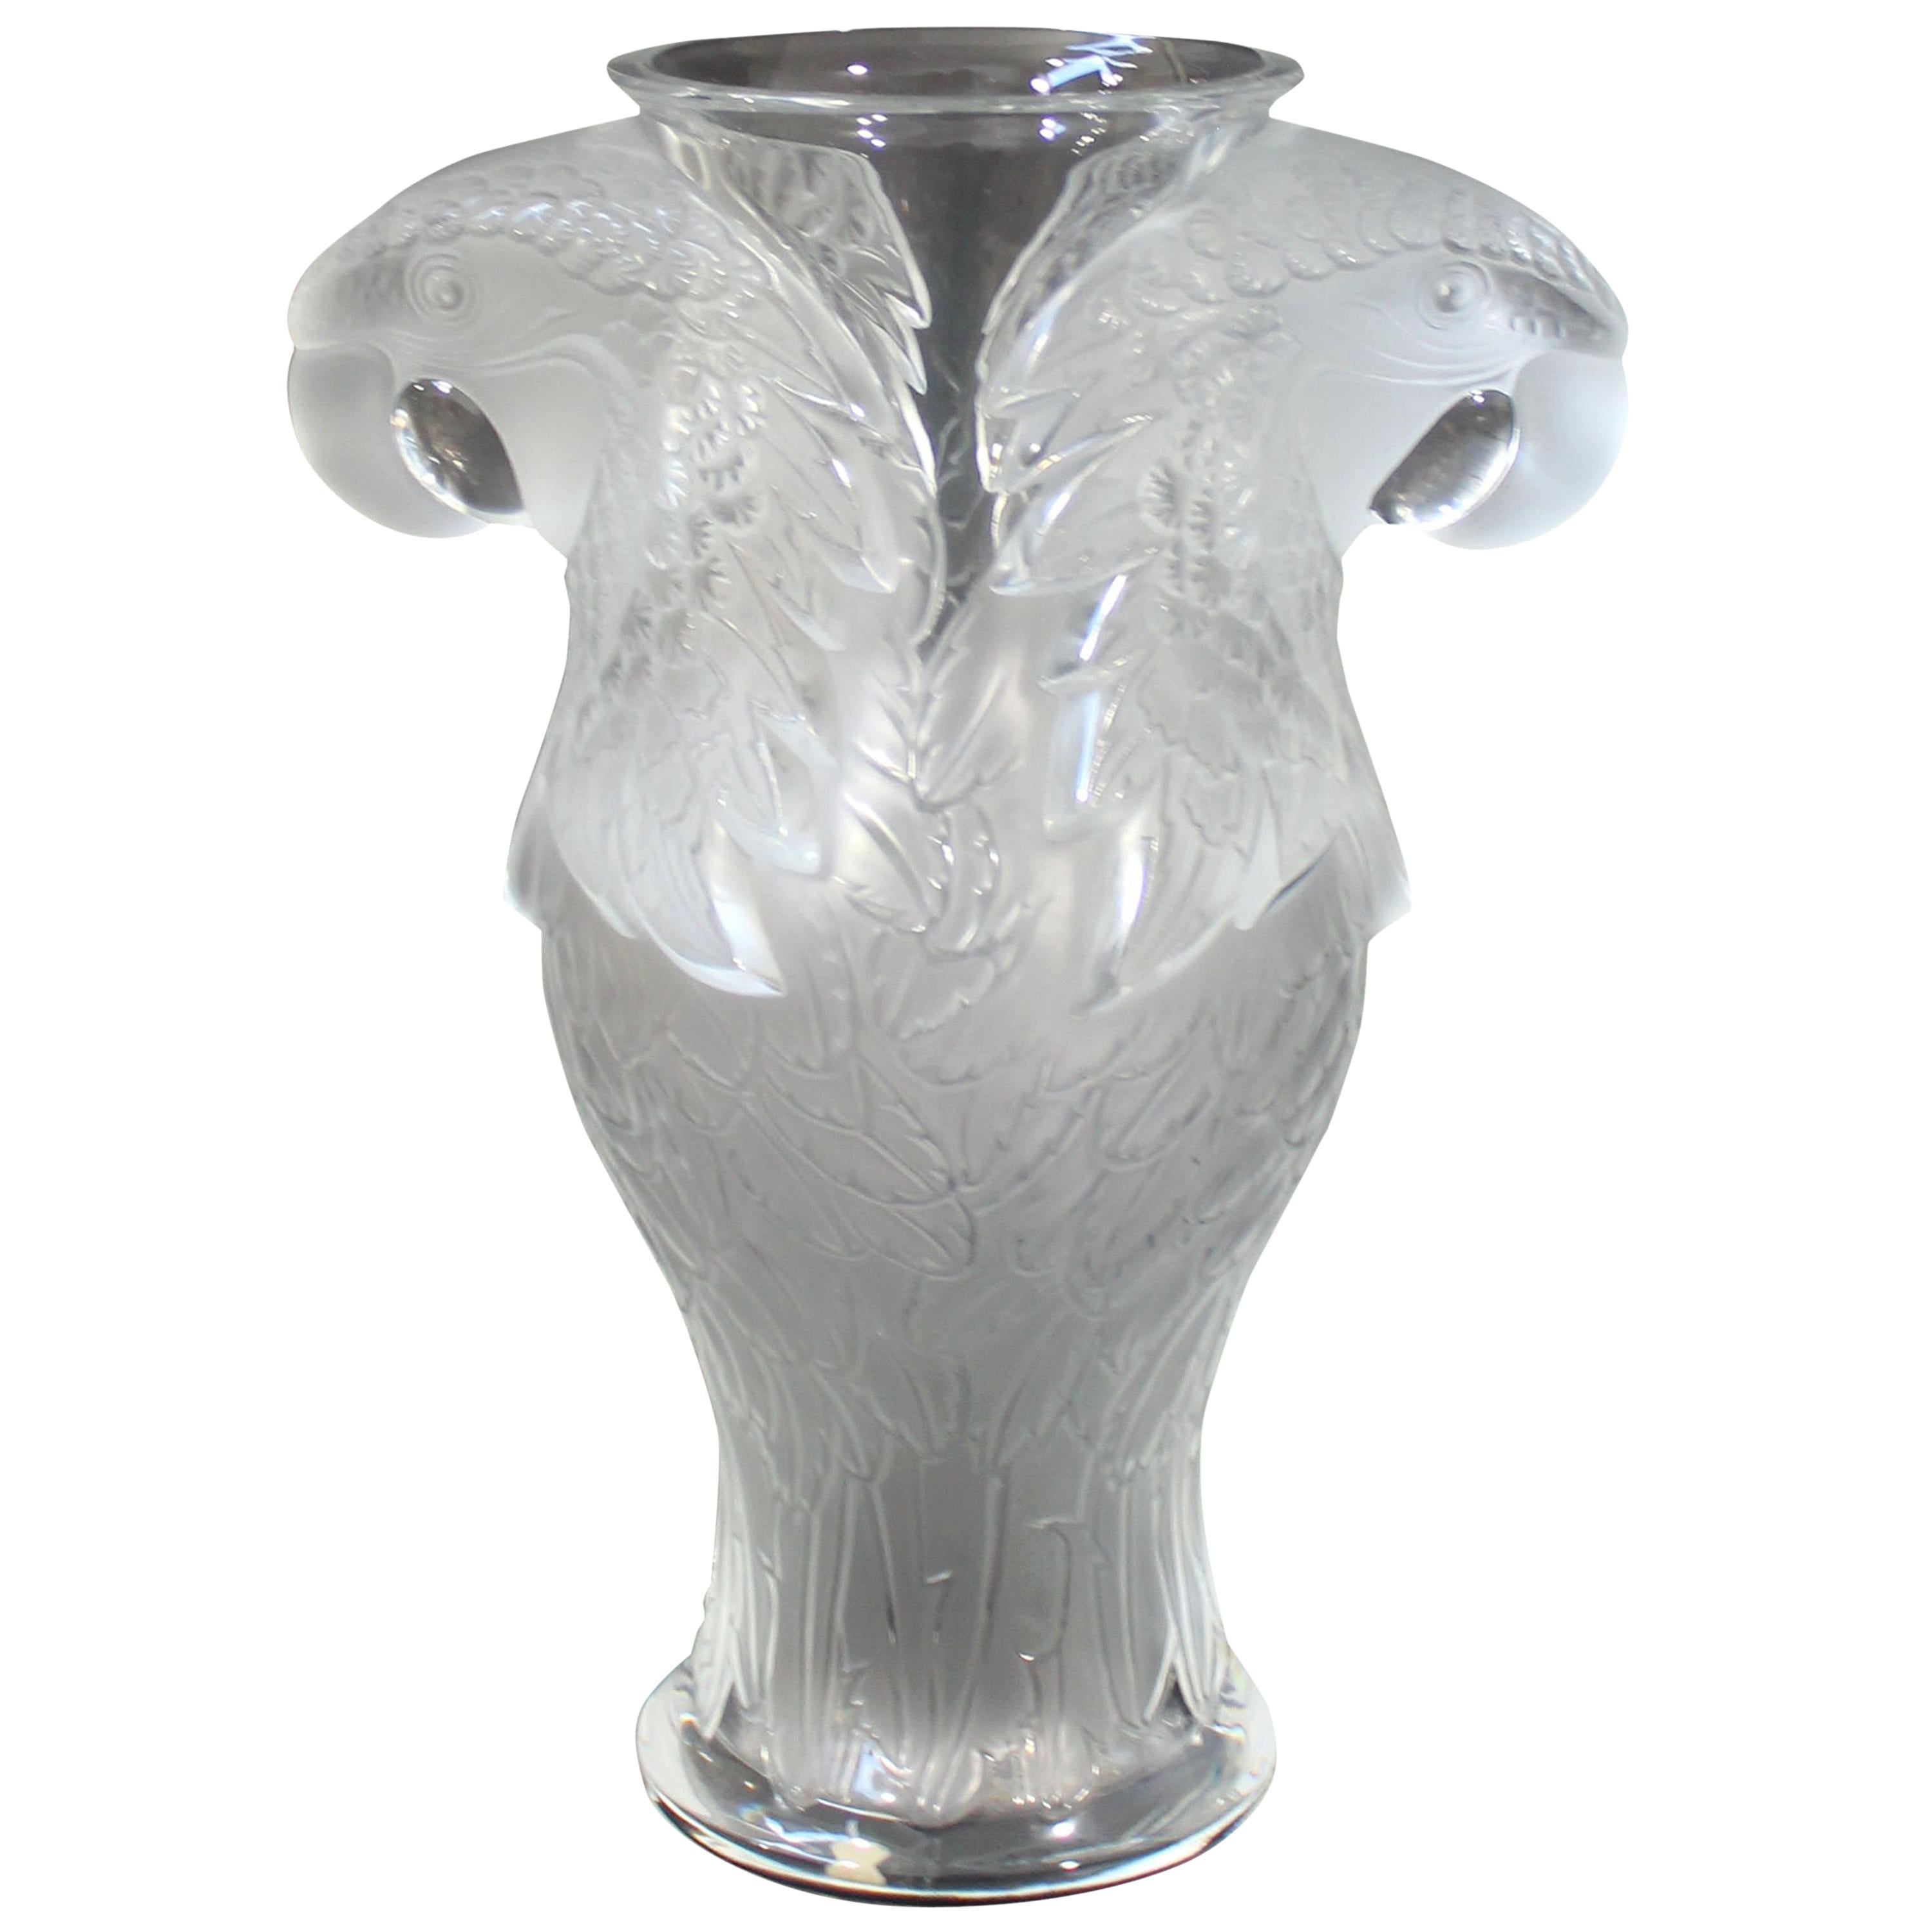 Contemporary Lalique France Crystal Glass Macao Macaw Vase Table Sculpture